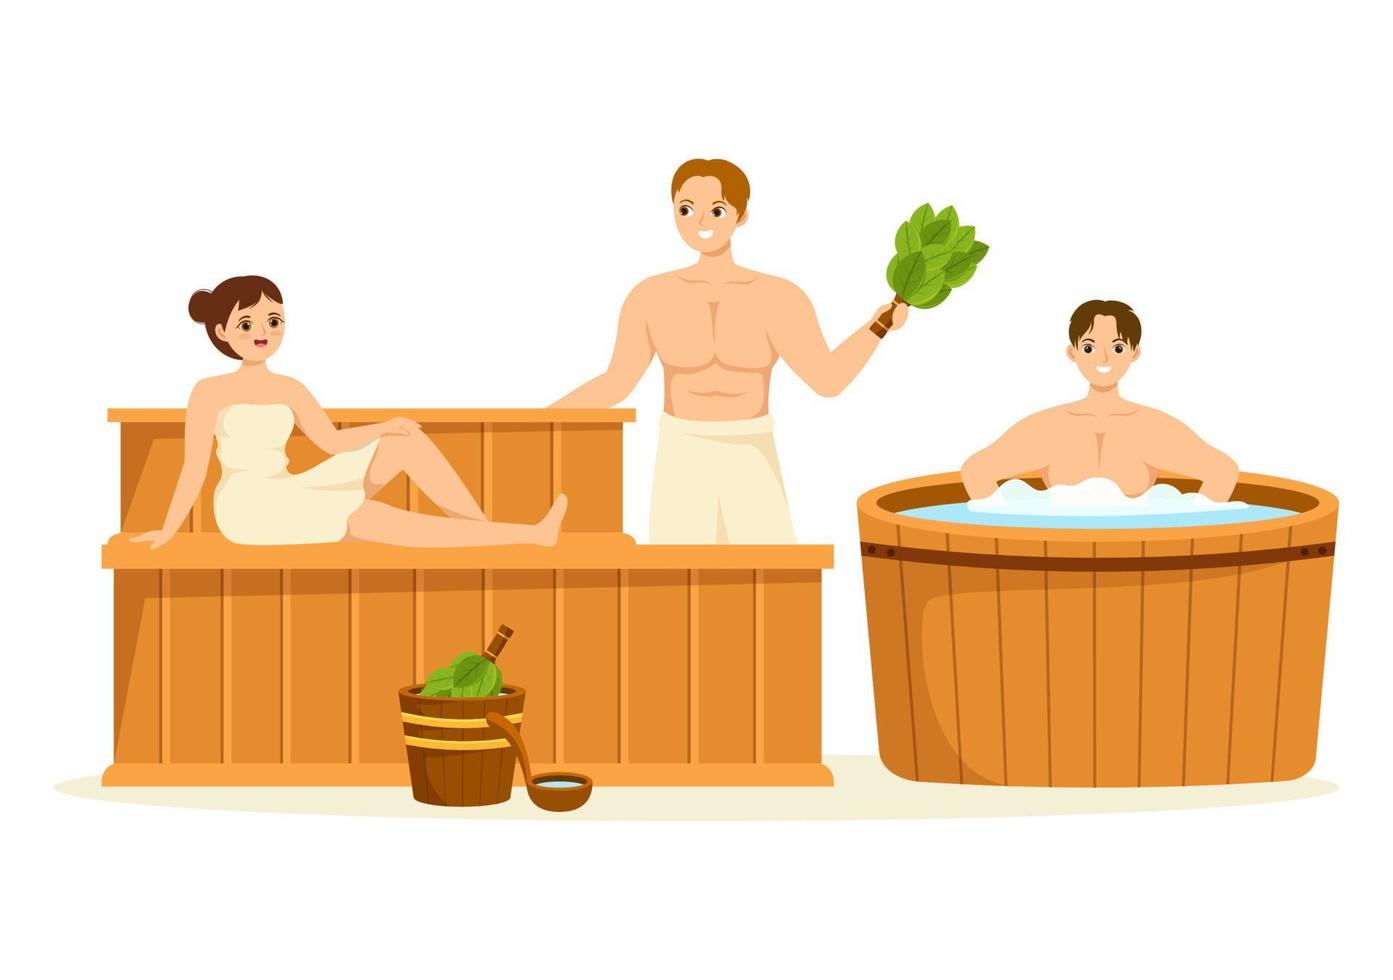 Sauna and Steam Room with People Relax, Washing Their Bodies, Steam or Enjoying Time in Flat Cartoon Hand Drawn Templates Illustration vector